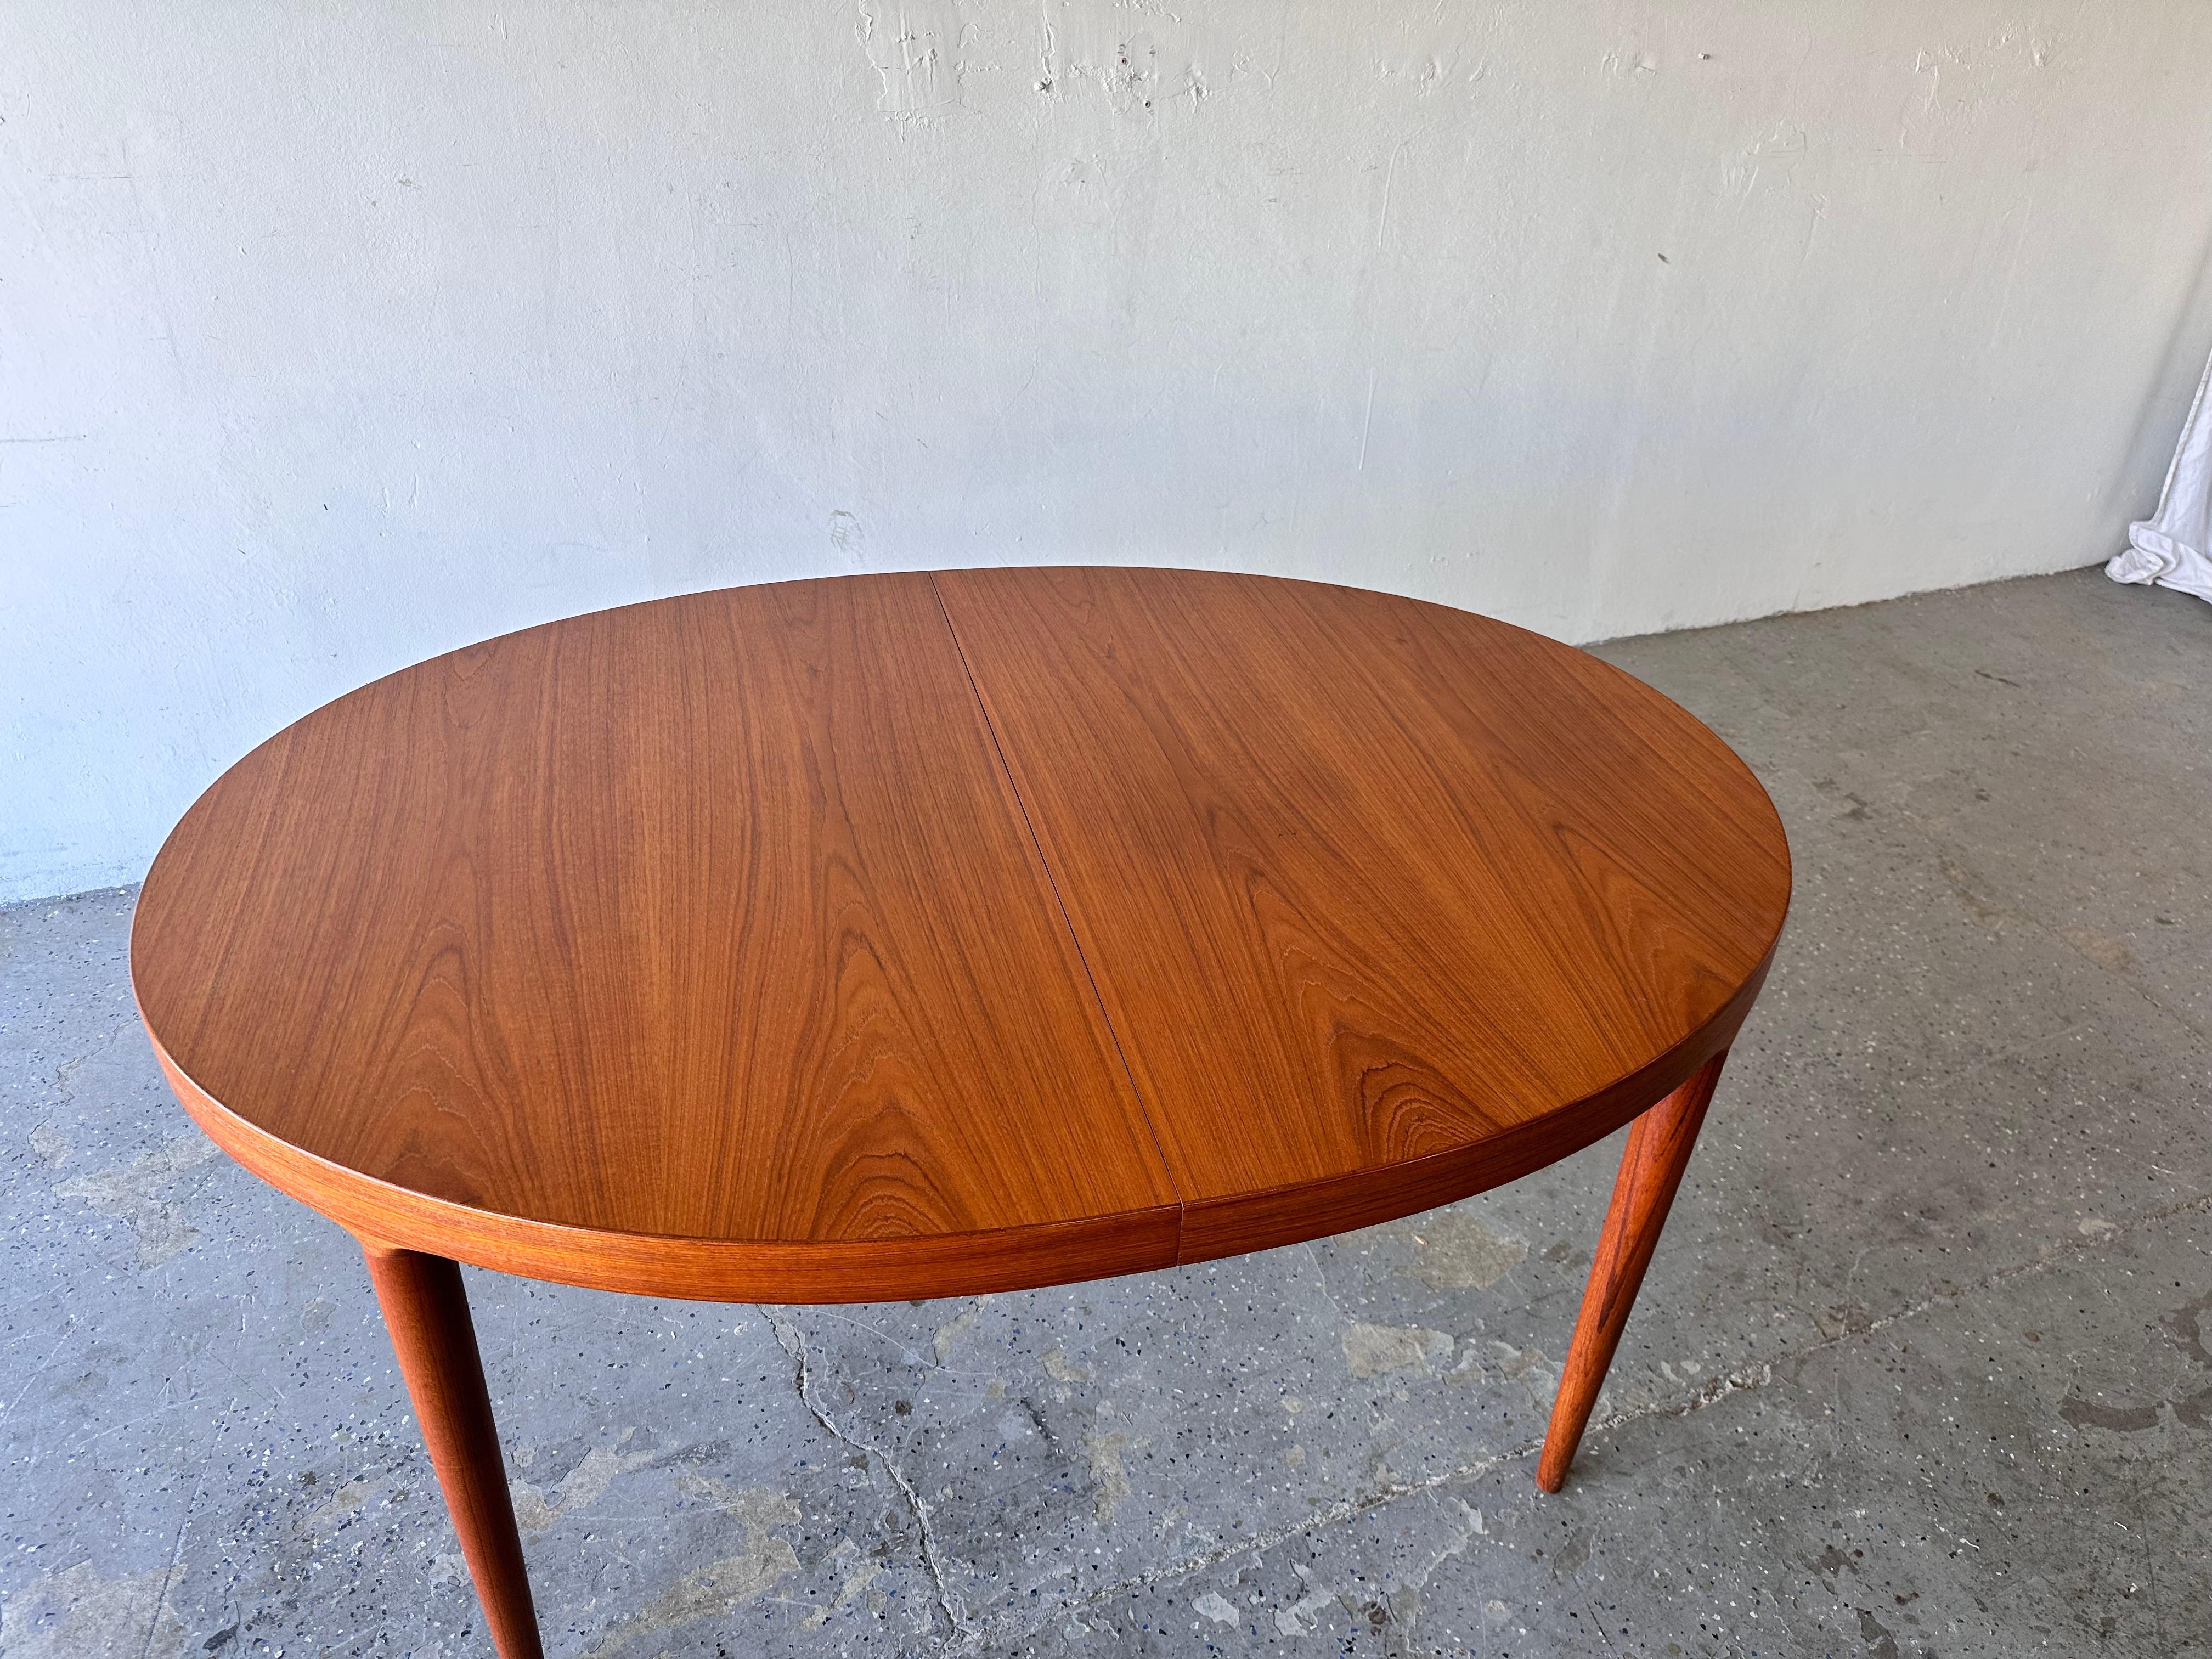 
Beautiful Teak dining table by Moreddi of denmark Designed by Harry Ostergaard. The teak grain is just stunning. Seats 4 up to 12. Has a extra leg that pulls out to support trable when fully extended.
   It is almost inImpossible to find a 12 seat